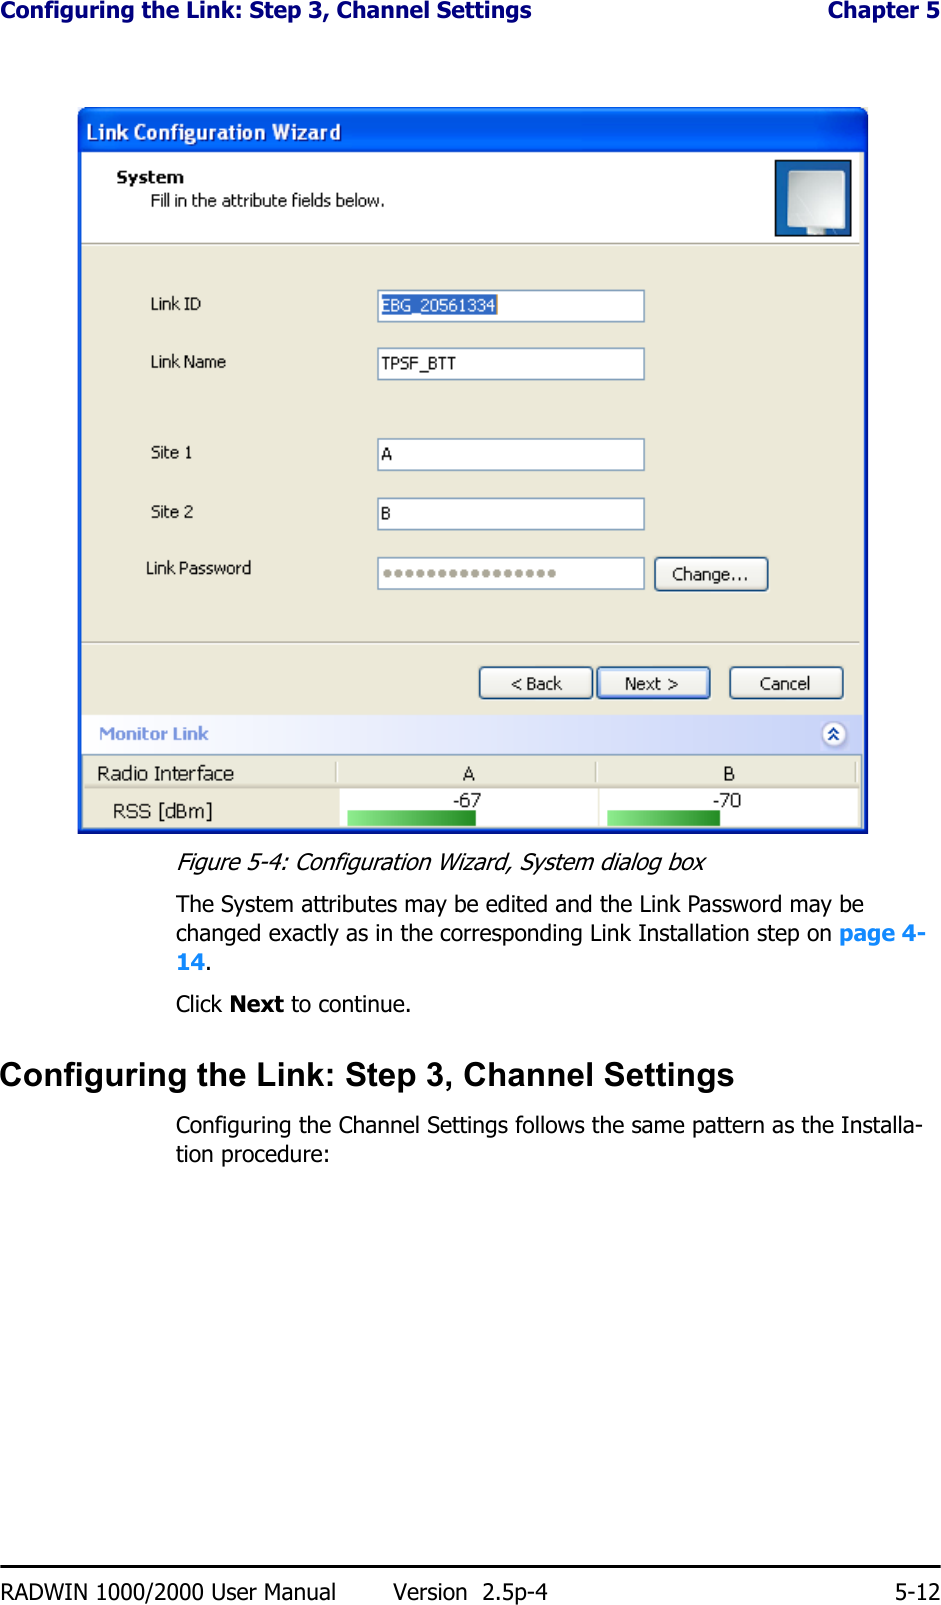 Configuring the Link: Step 3, Channel Settings  Chapter 5RADWIN 1000/2000 User Manual Version  2.5p-4 5-12Figure 5-4: Configuration Wizard, System dialog boxThe System attributes may be edited and the Link Password may be changed exactly as in the corresponding Link Installation step on page 4-14.Click Next to continue.Configuring the Link: Step 3, Channel SettingsConfiguring the Channel Settings follows the same pattern as the Installa-tion procedure: